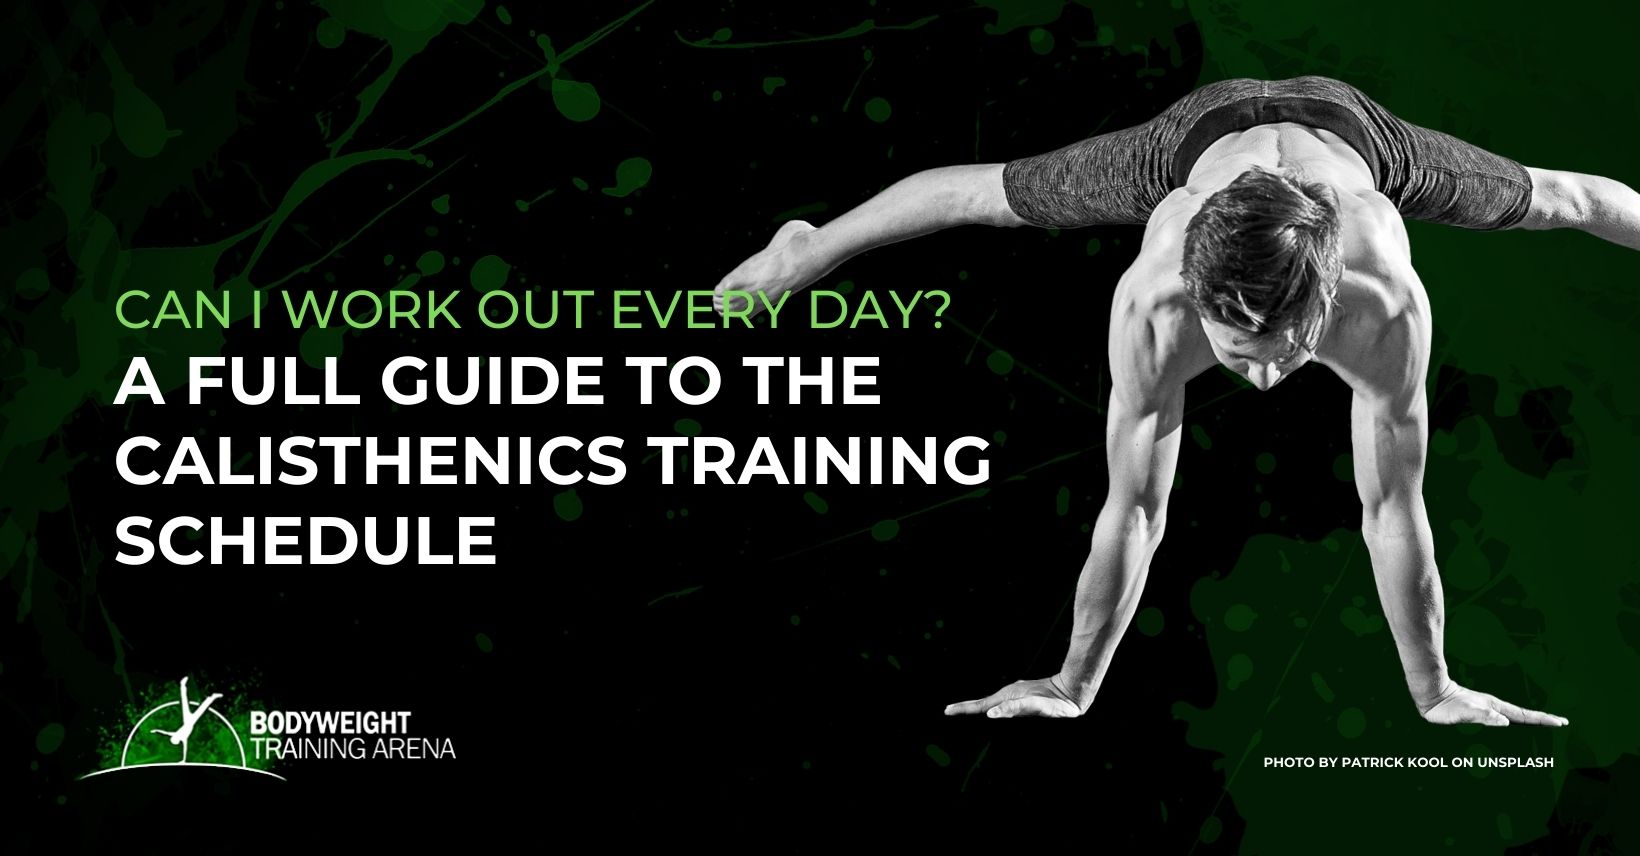 Can I work out every day? A full guide to the calisthenics training schedule